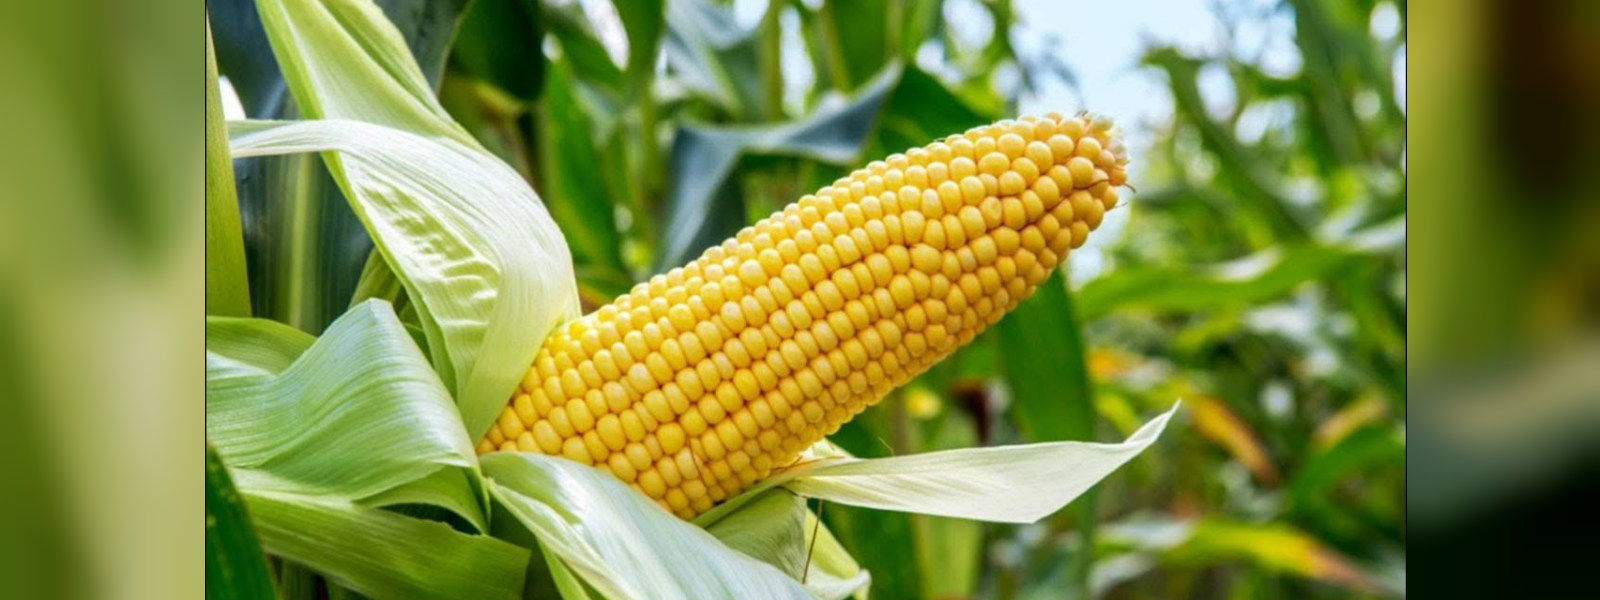 Government to announce certified price for corn